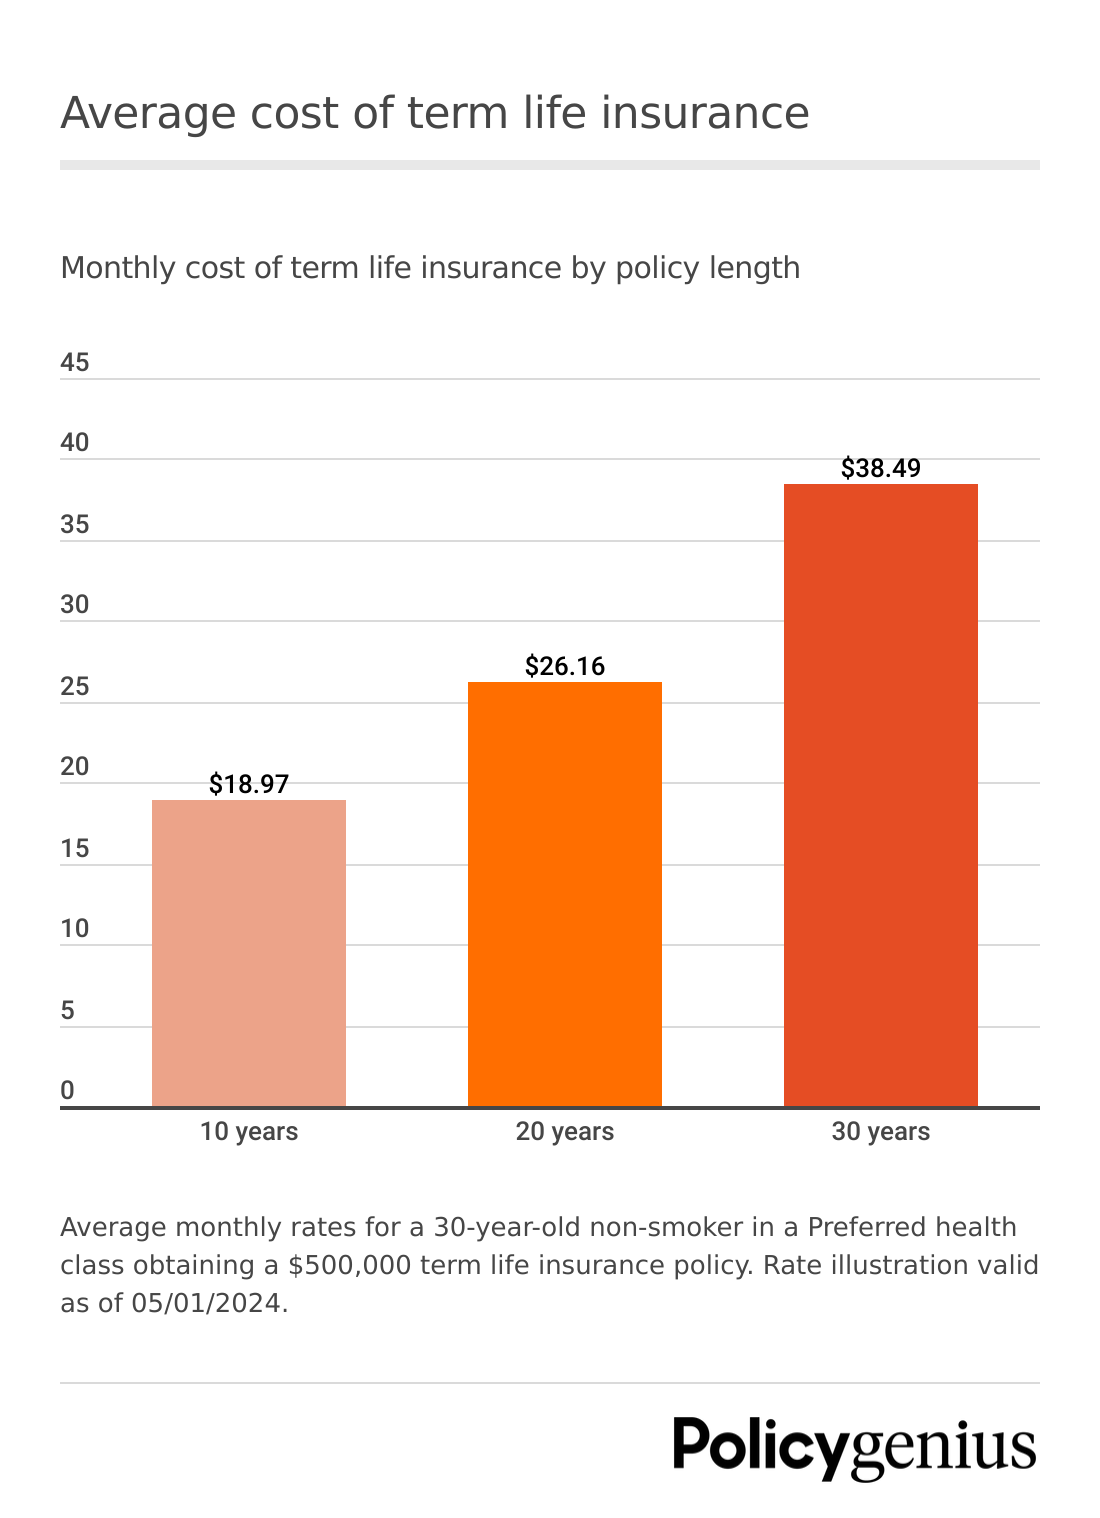 Average cost of term life insurance based on policies offered through Policygenius as of May of 2024.